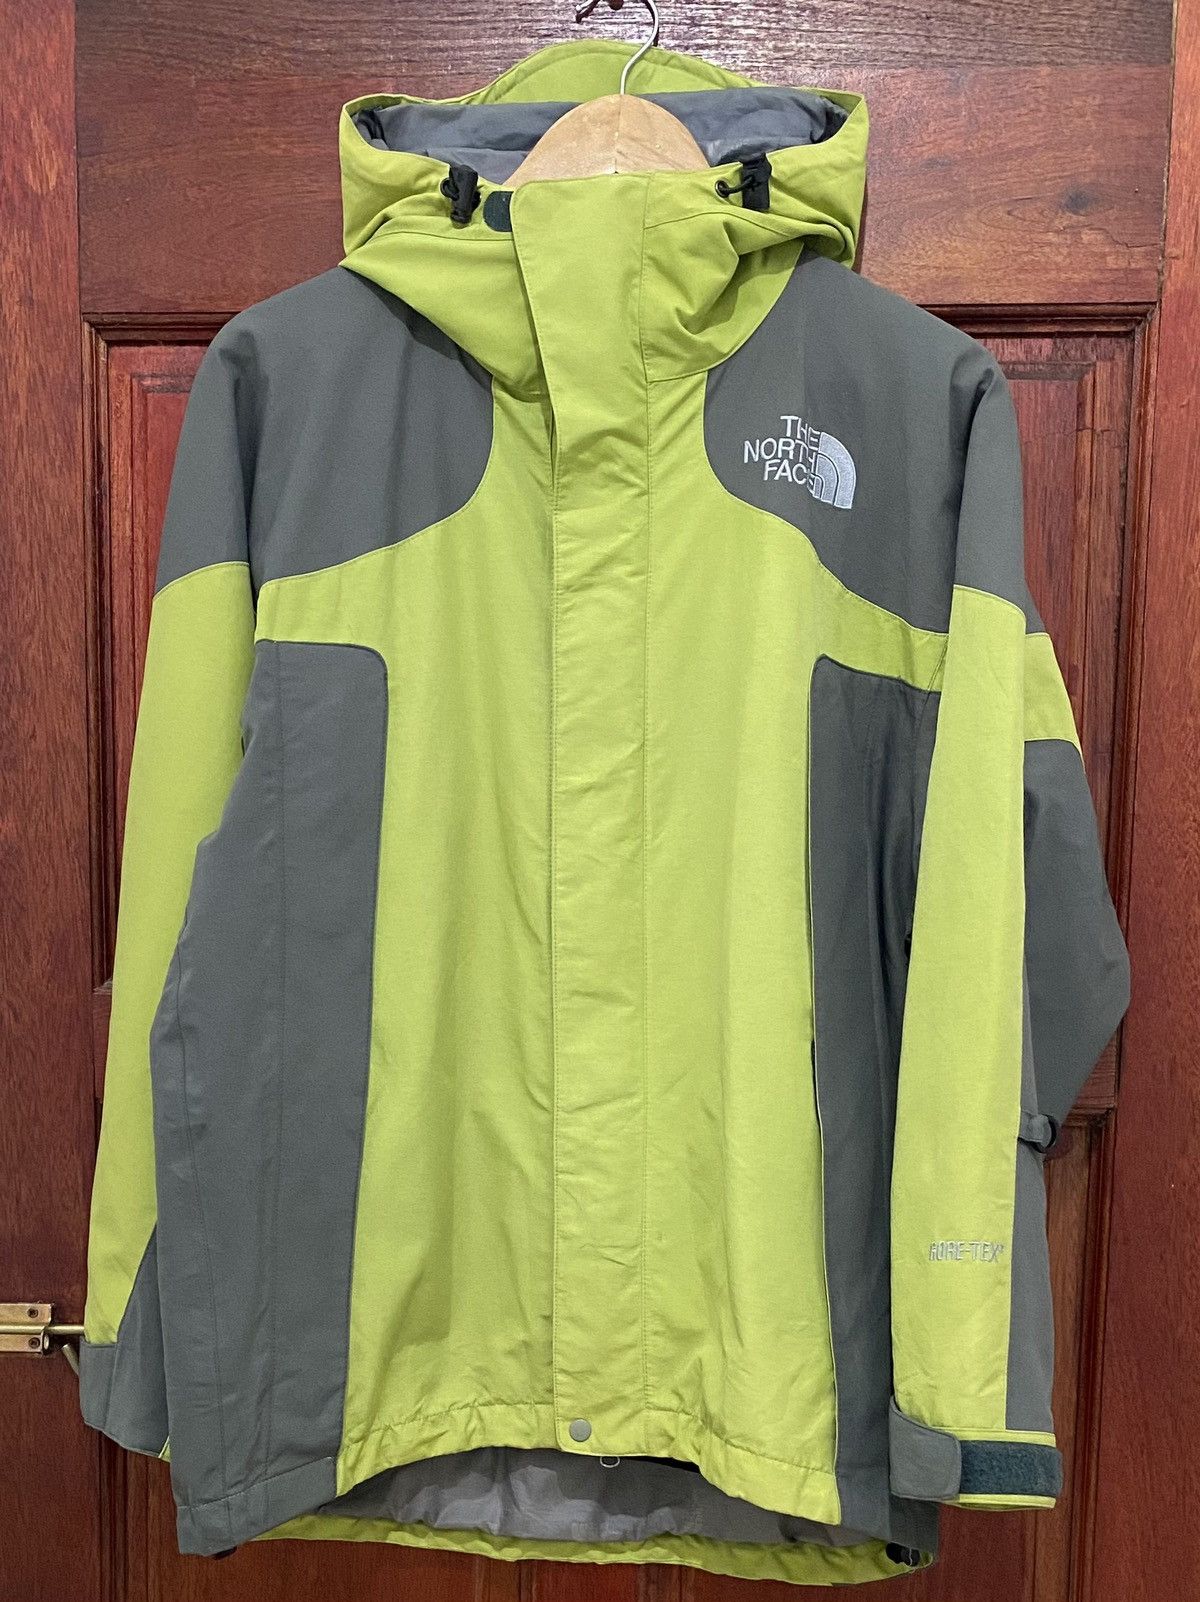 The North Face Gore-Tex Gorpcore Jacket - 1